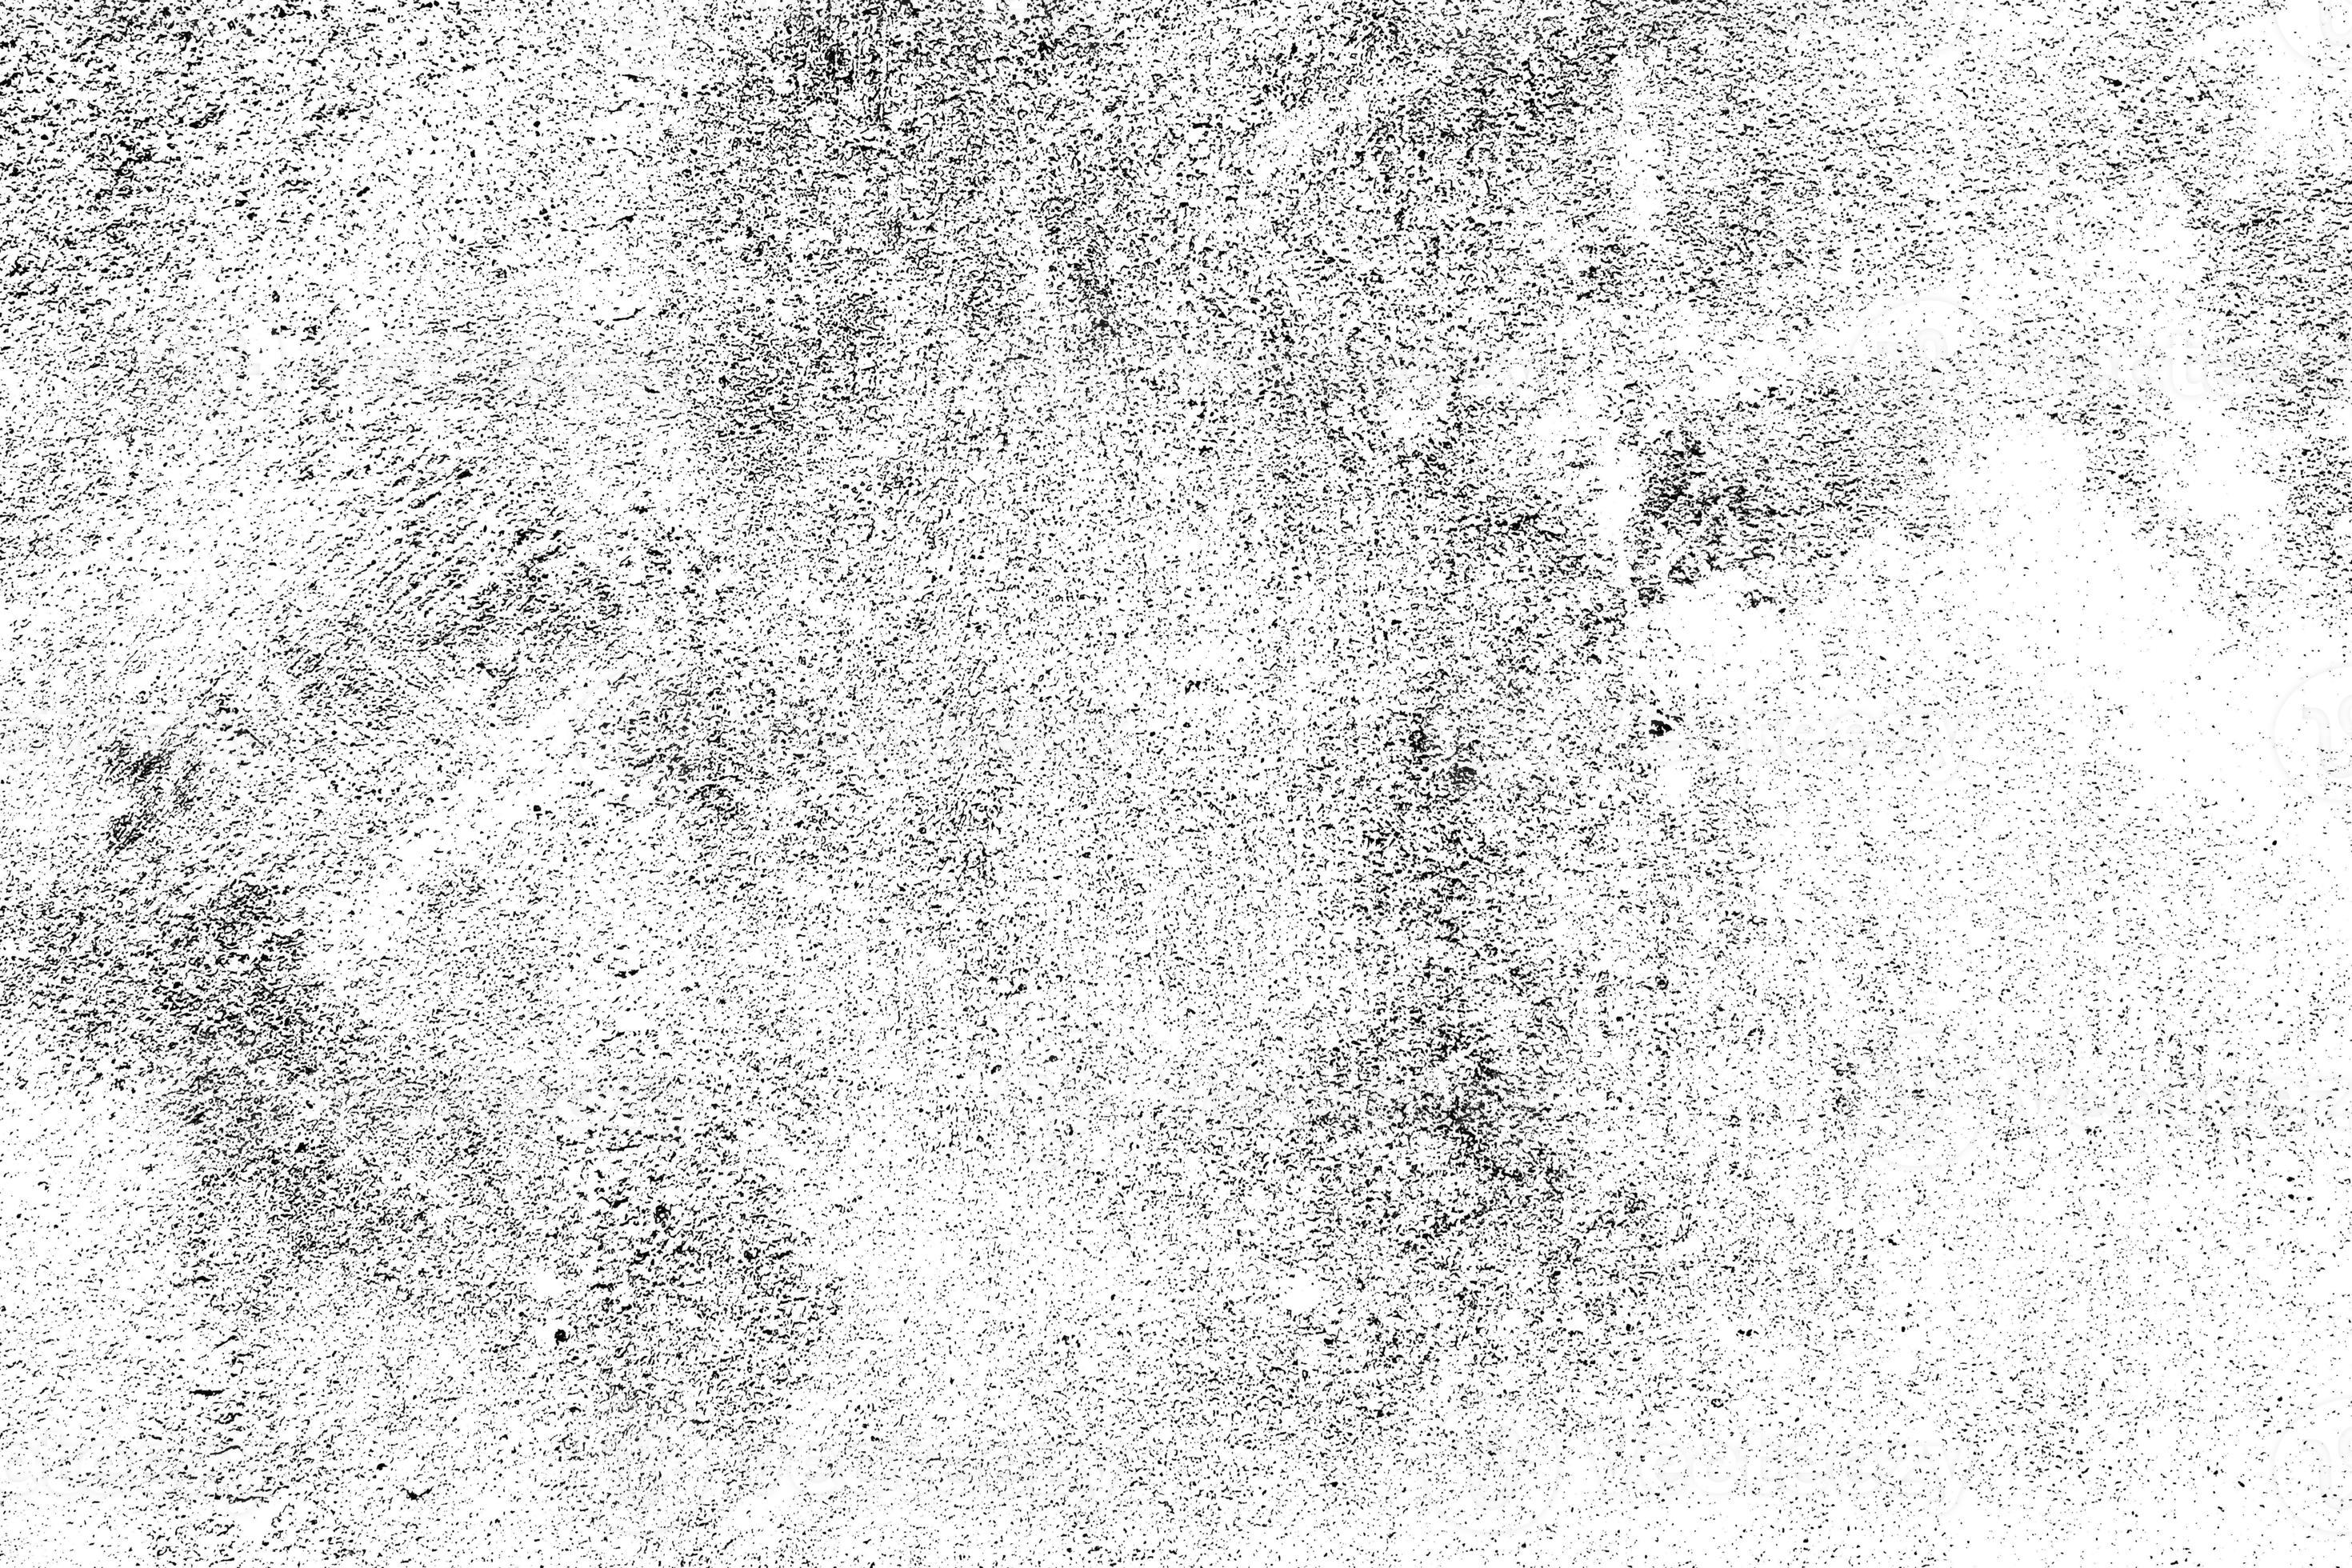 Black grunge dust and scratches distressed design. Dirty grunge texture  photo editor layer. Black and white overlay grunge abstract background.  10322520 Stock Photo at Vecteezy